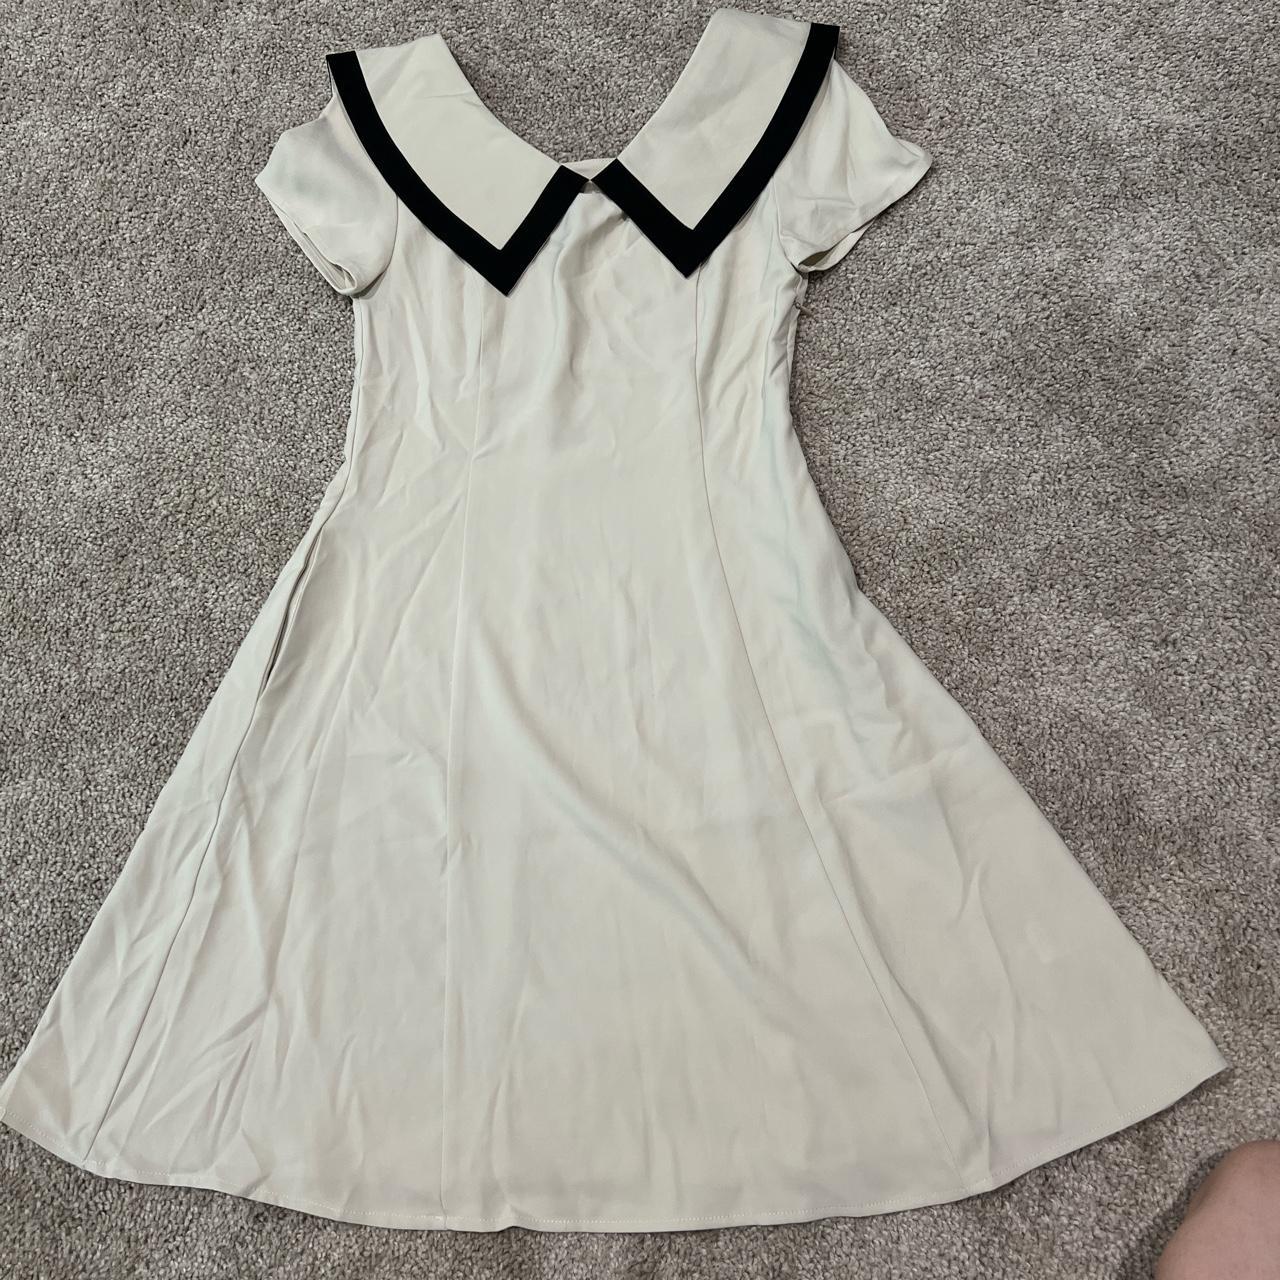 white dating dress Silk super comfy New without tag... - Depop